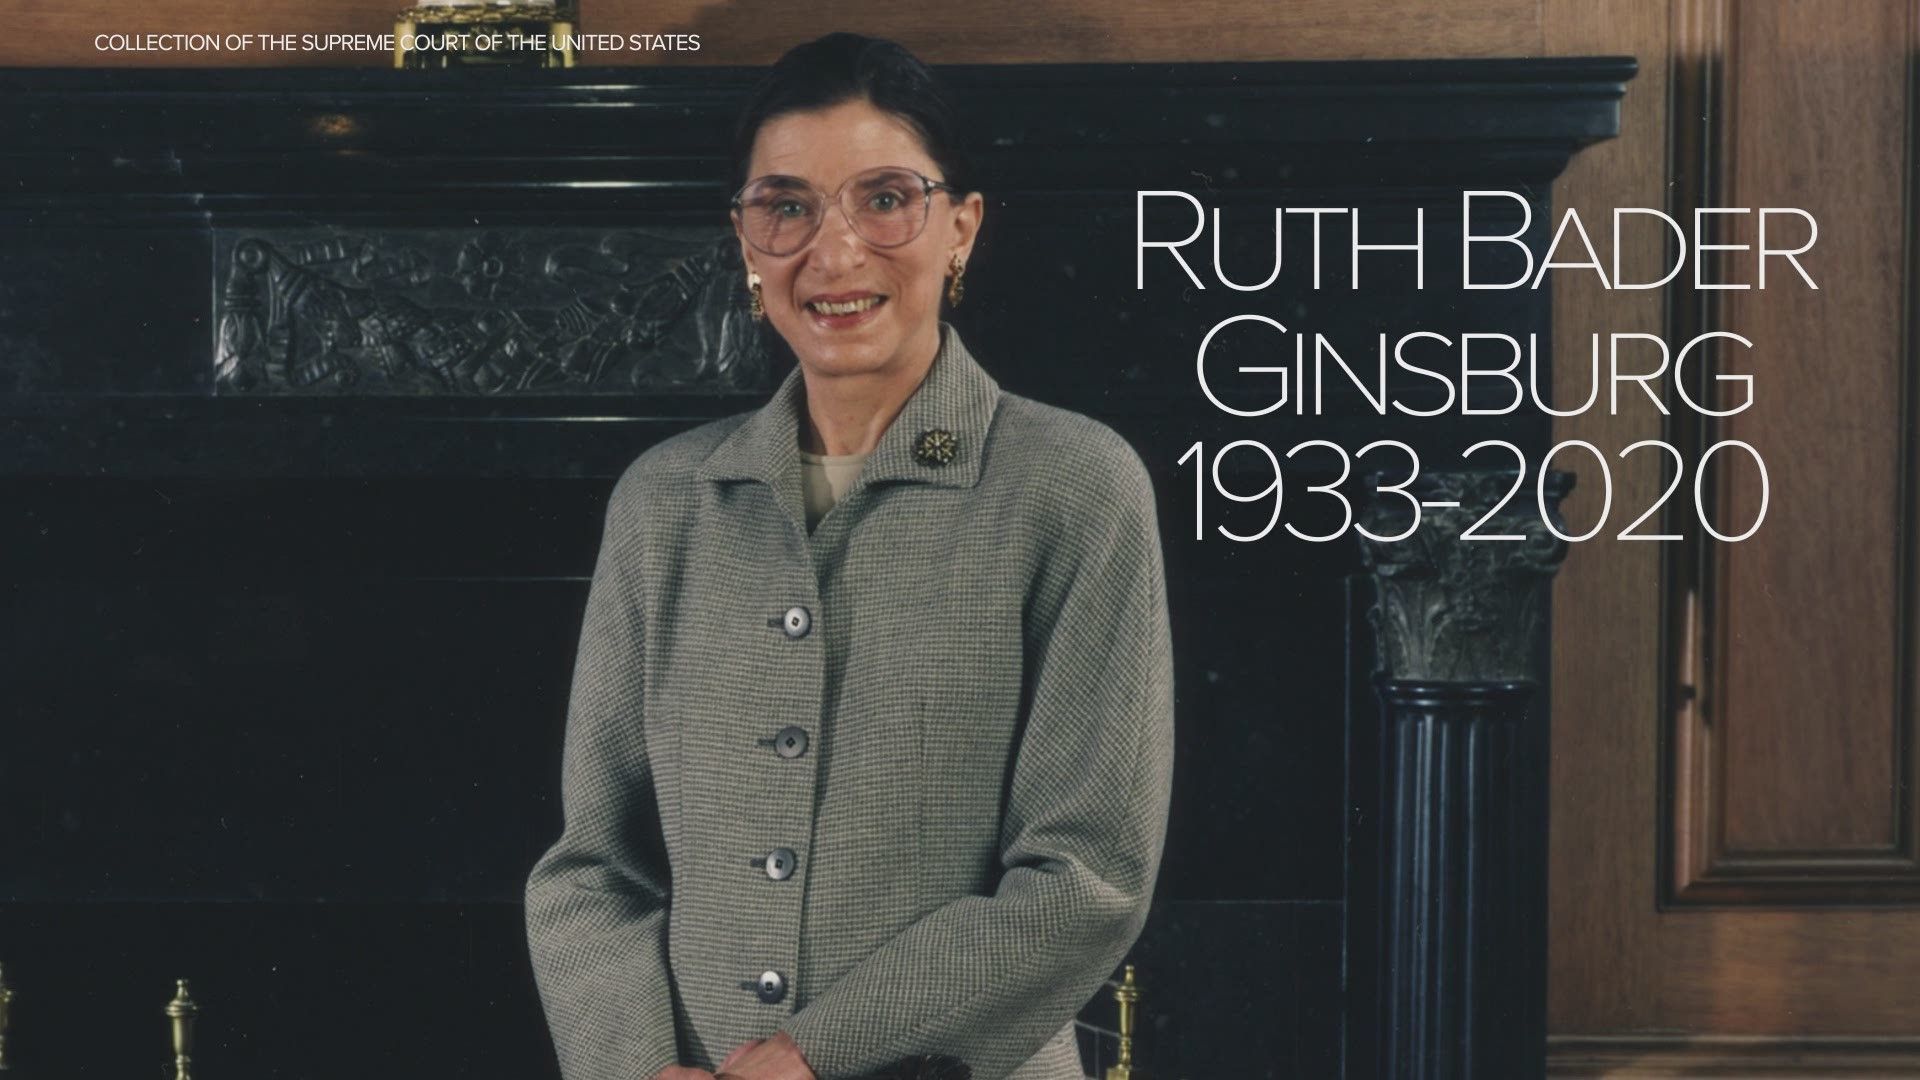 Ruth Bader Ginsburg's deathbed statement about filling court seatnews.com